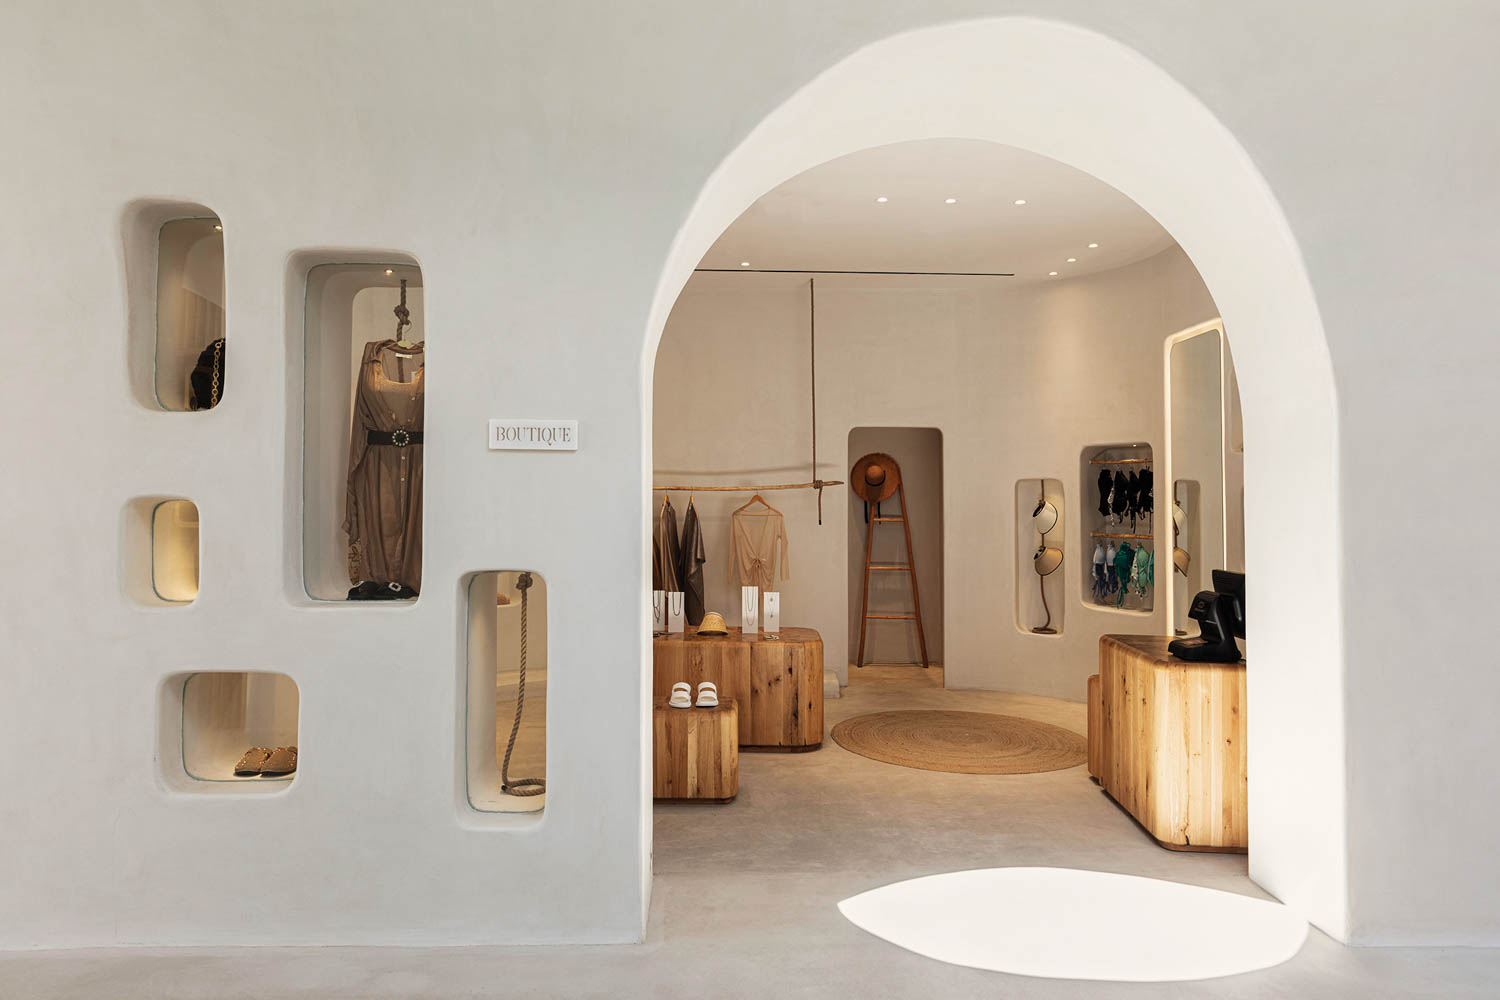 a curved arch doorway flanked by wall niches showcasing locally made goods